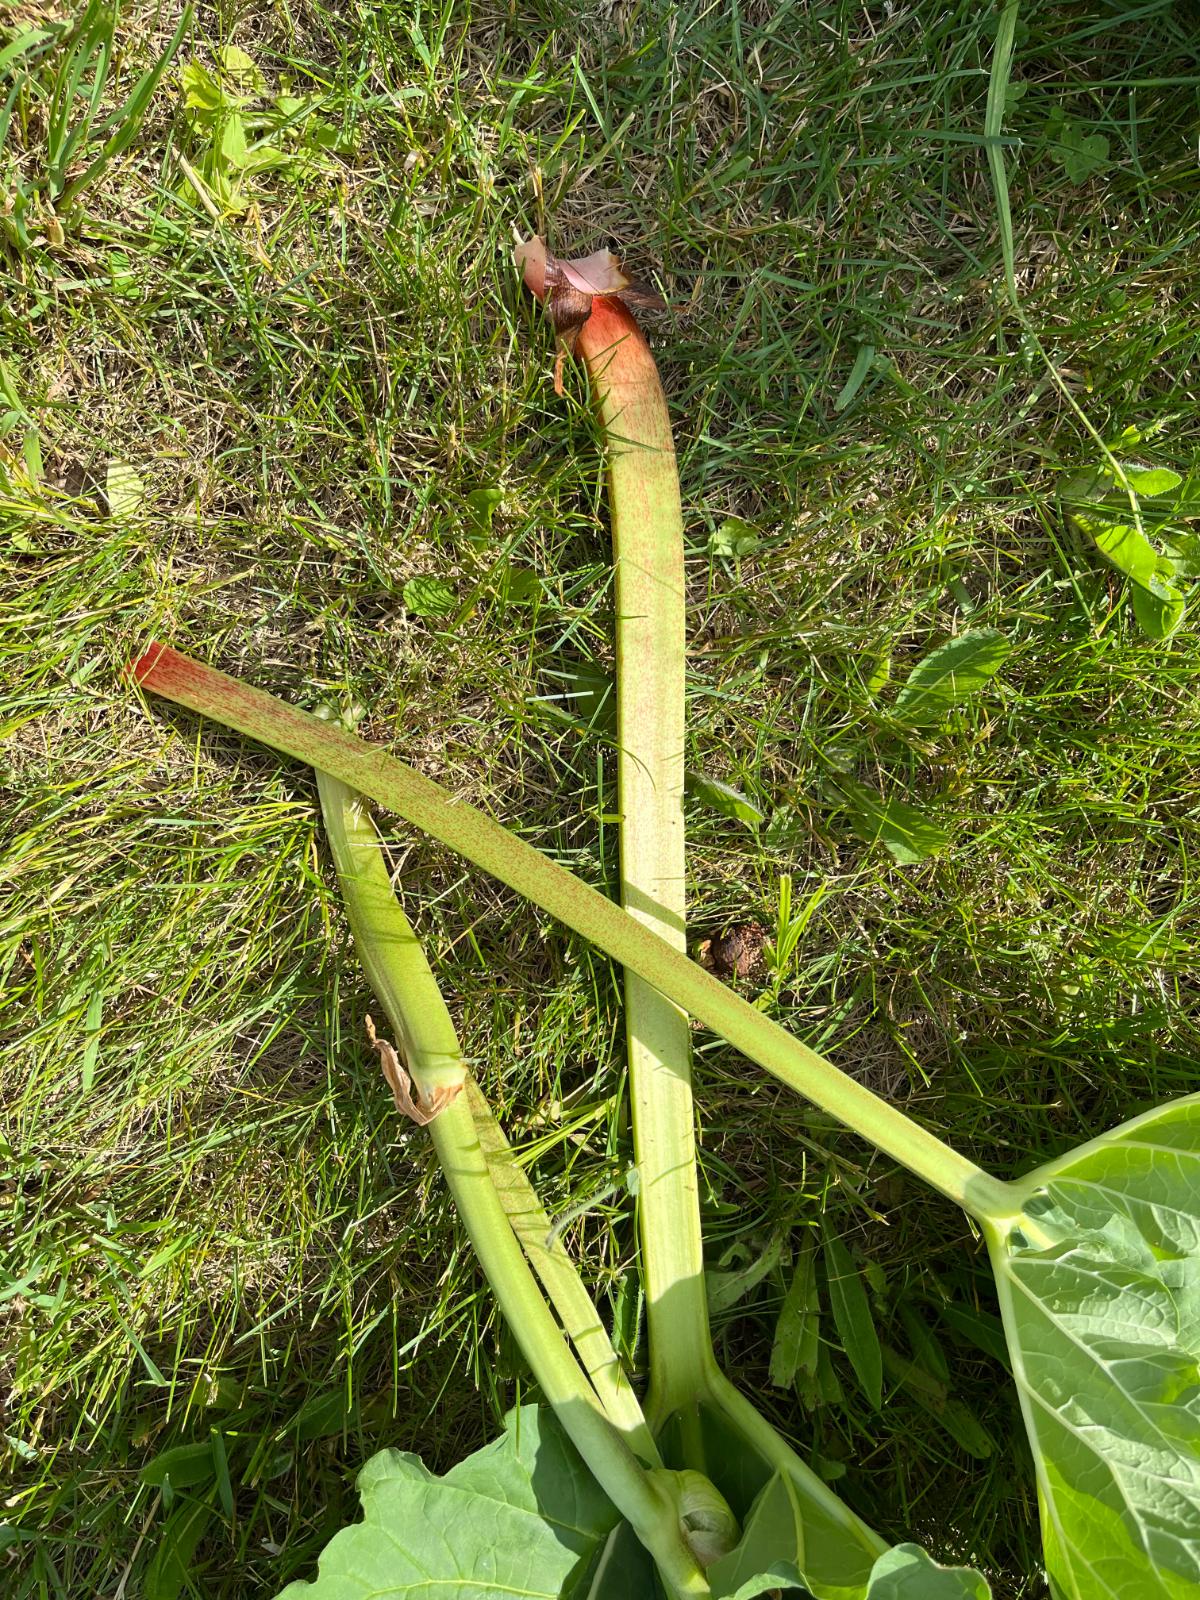 "Ripe" rhubarb stalks with a lot of green color